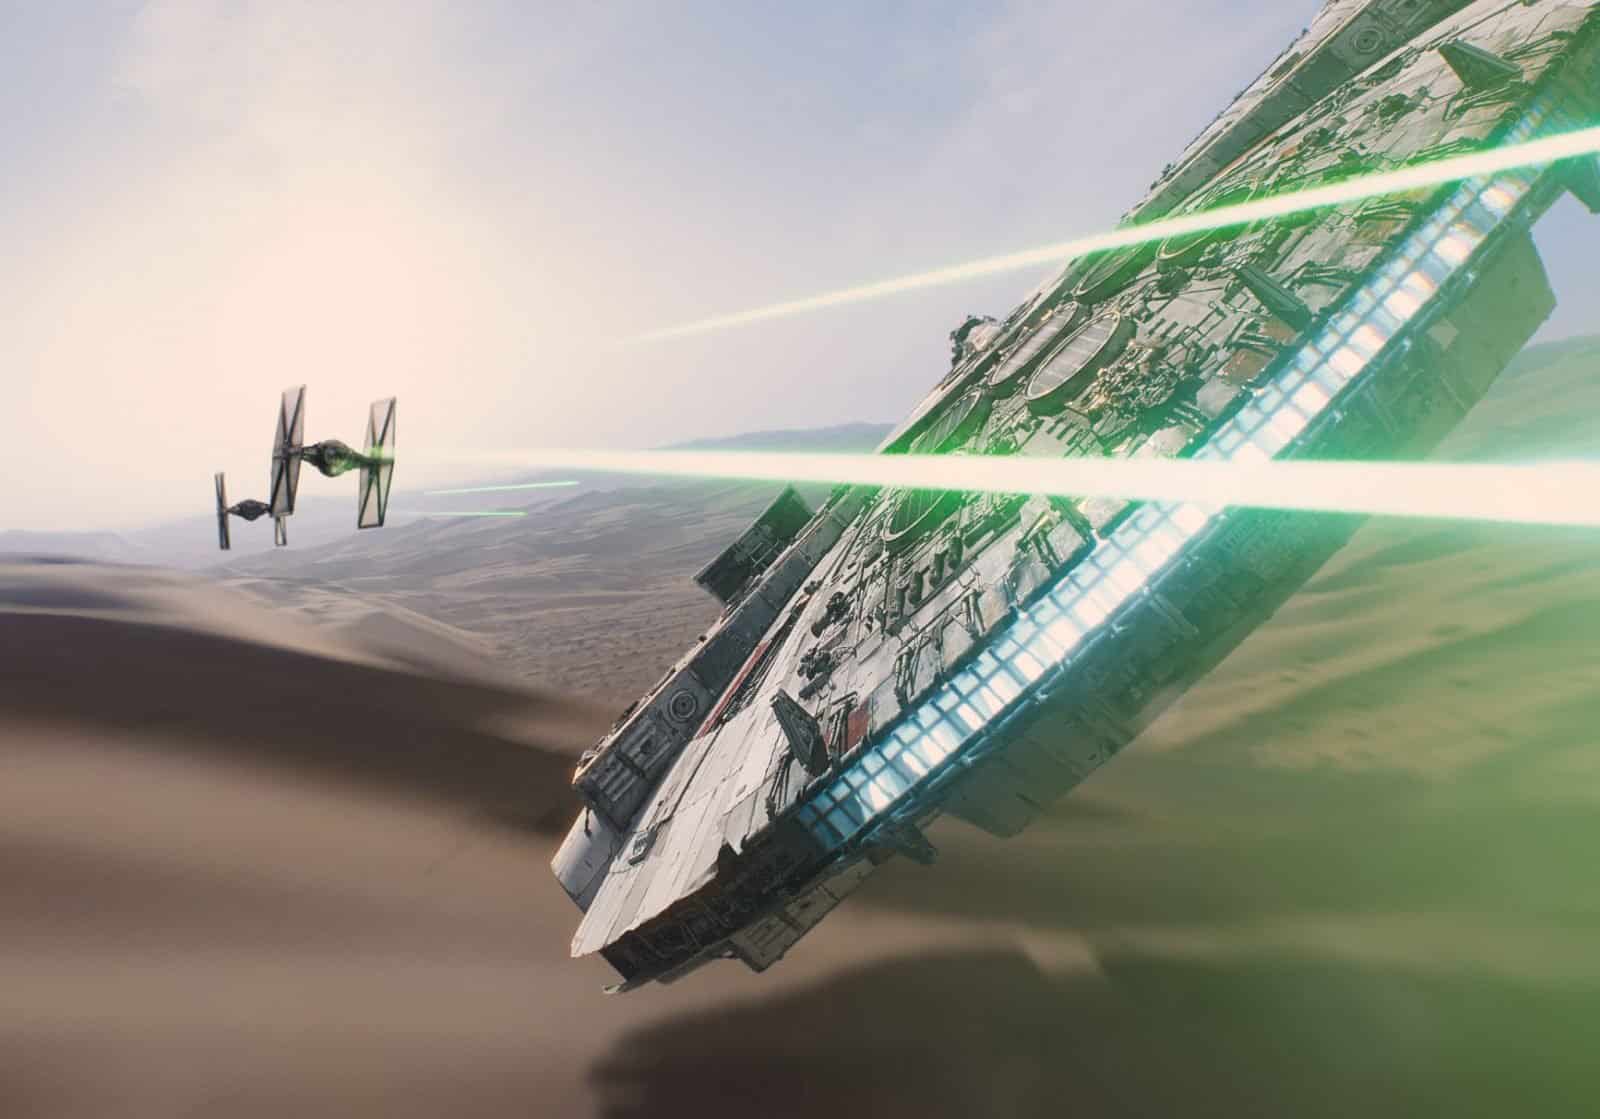 Star Wars VII The Force Awakens 42 - The Millennium Falcon battle with TIE fighters